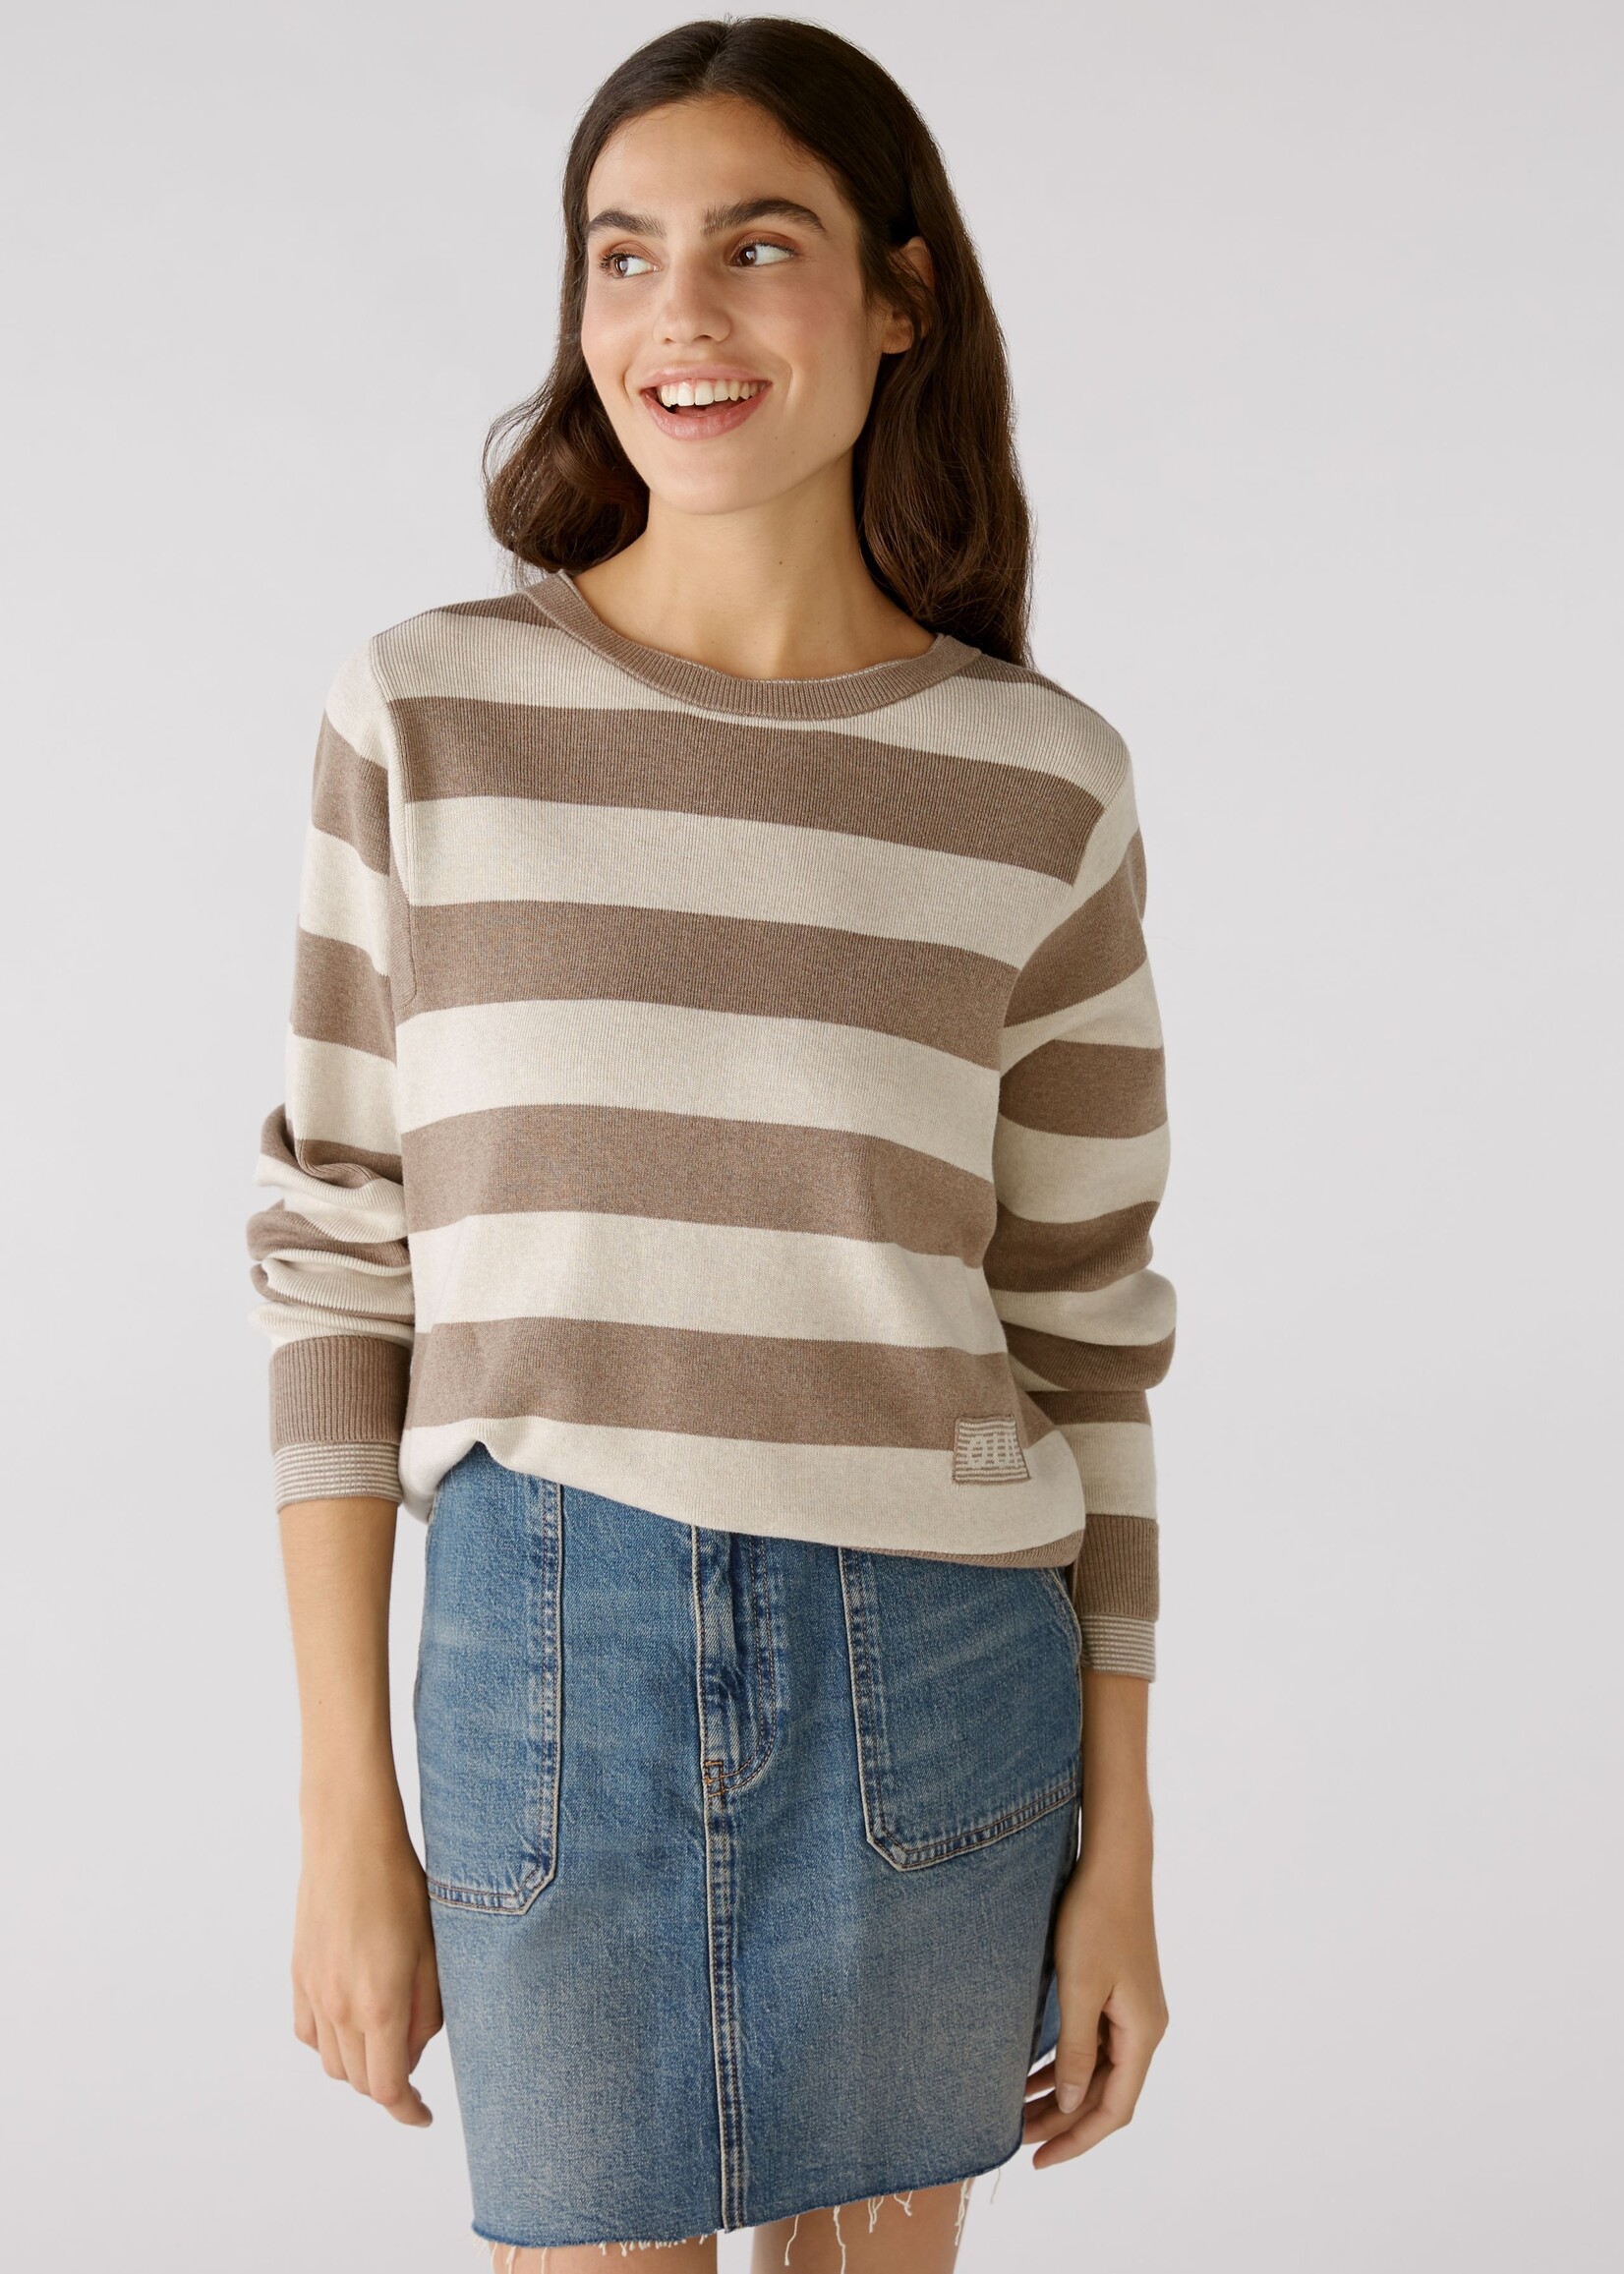 Ouí Pullover Striped Oui